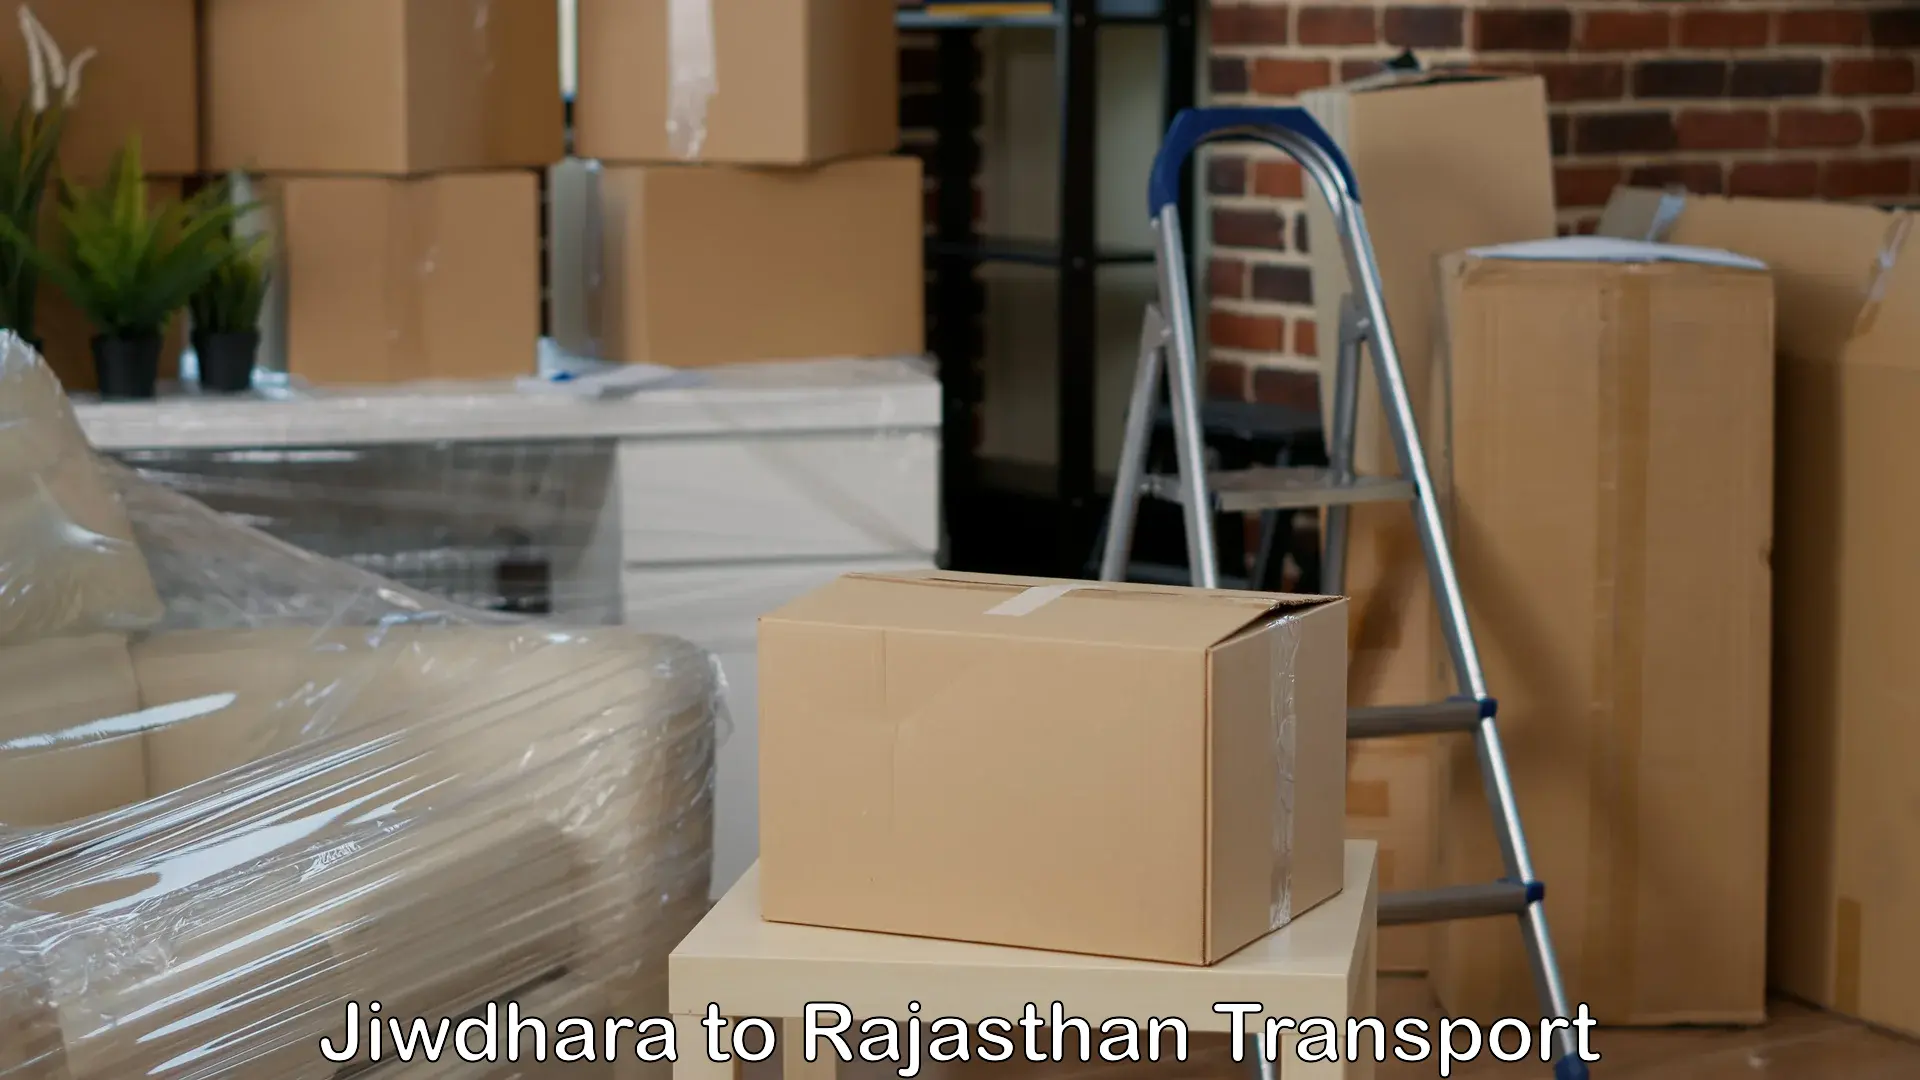 Goods delivery service Jiwdhara to Yeswanthapur